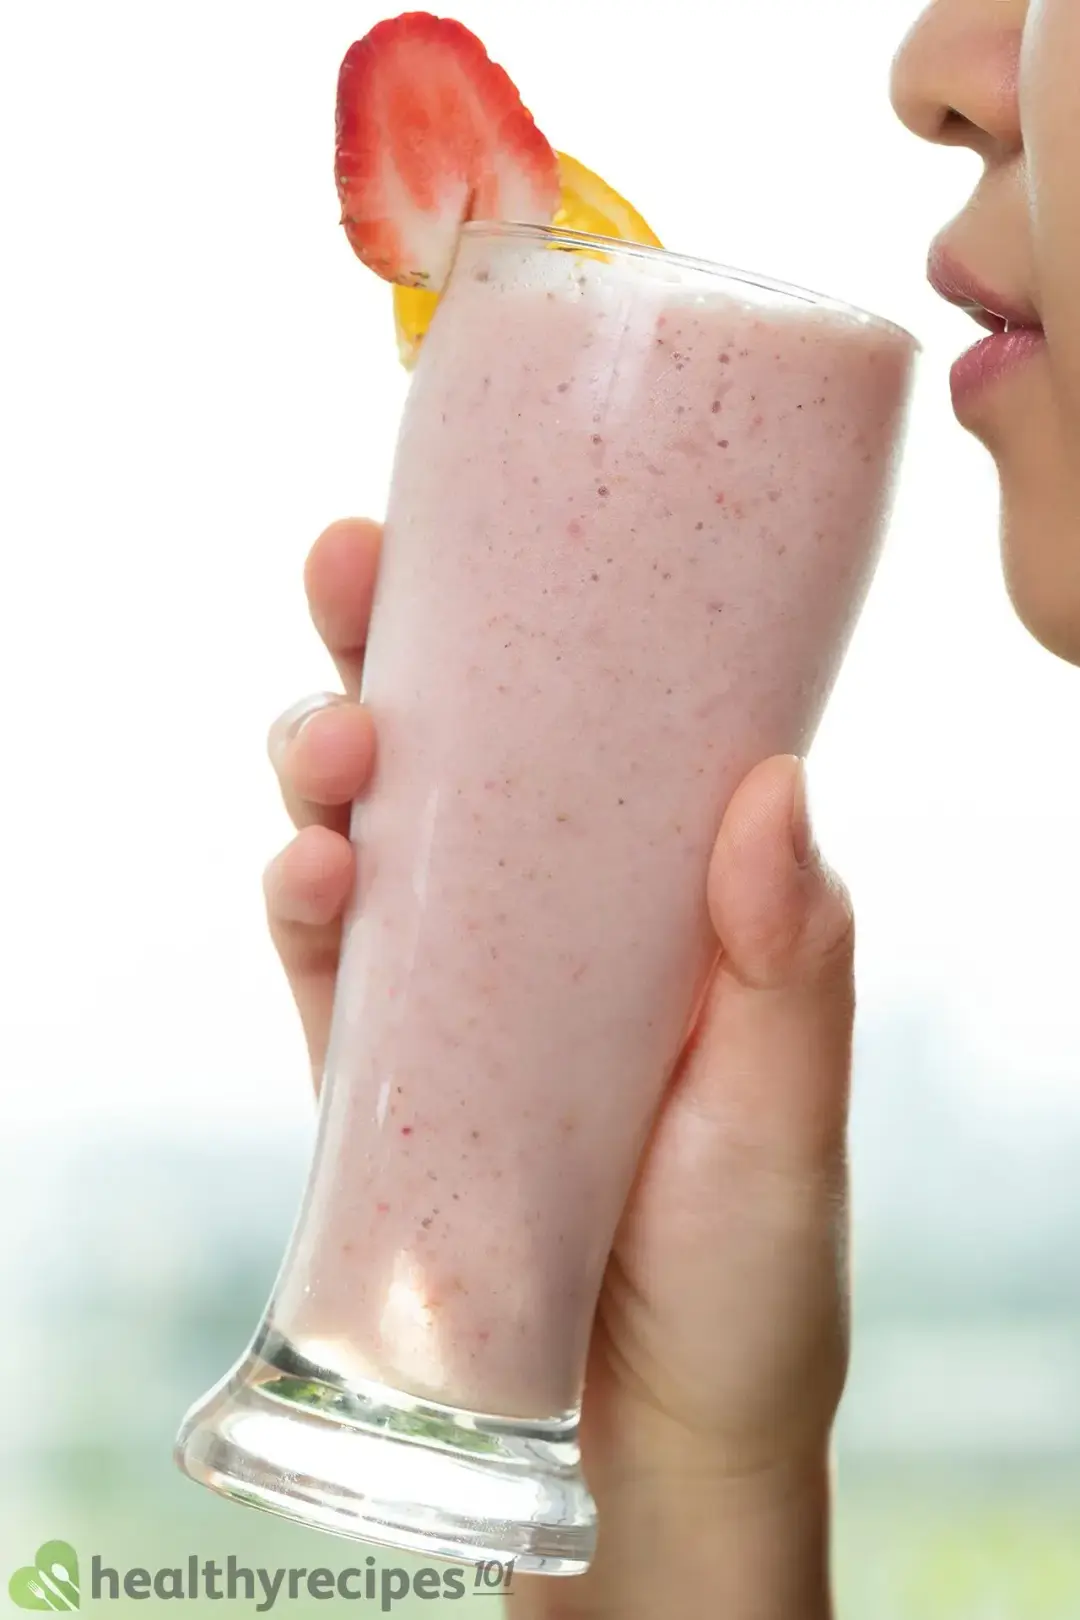 is strawberry banana smoothie healthy